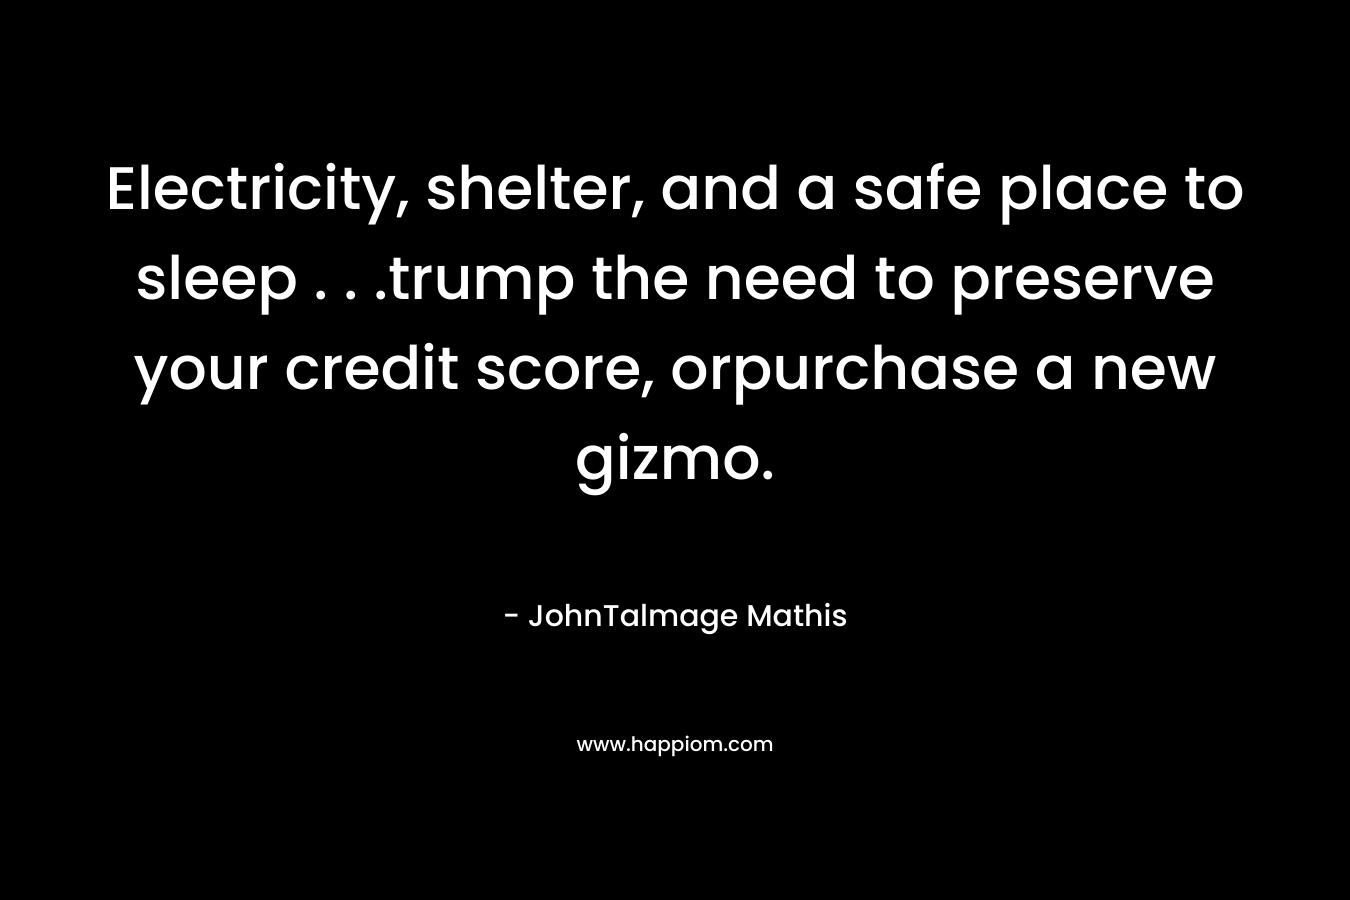 Electricity, shelter, and a safe place to sleep . . .trump the need to preserve your credit score, orpurchase a new gizmo. – JohnTalmage Mathis